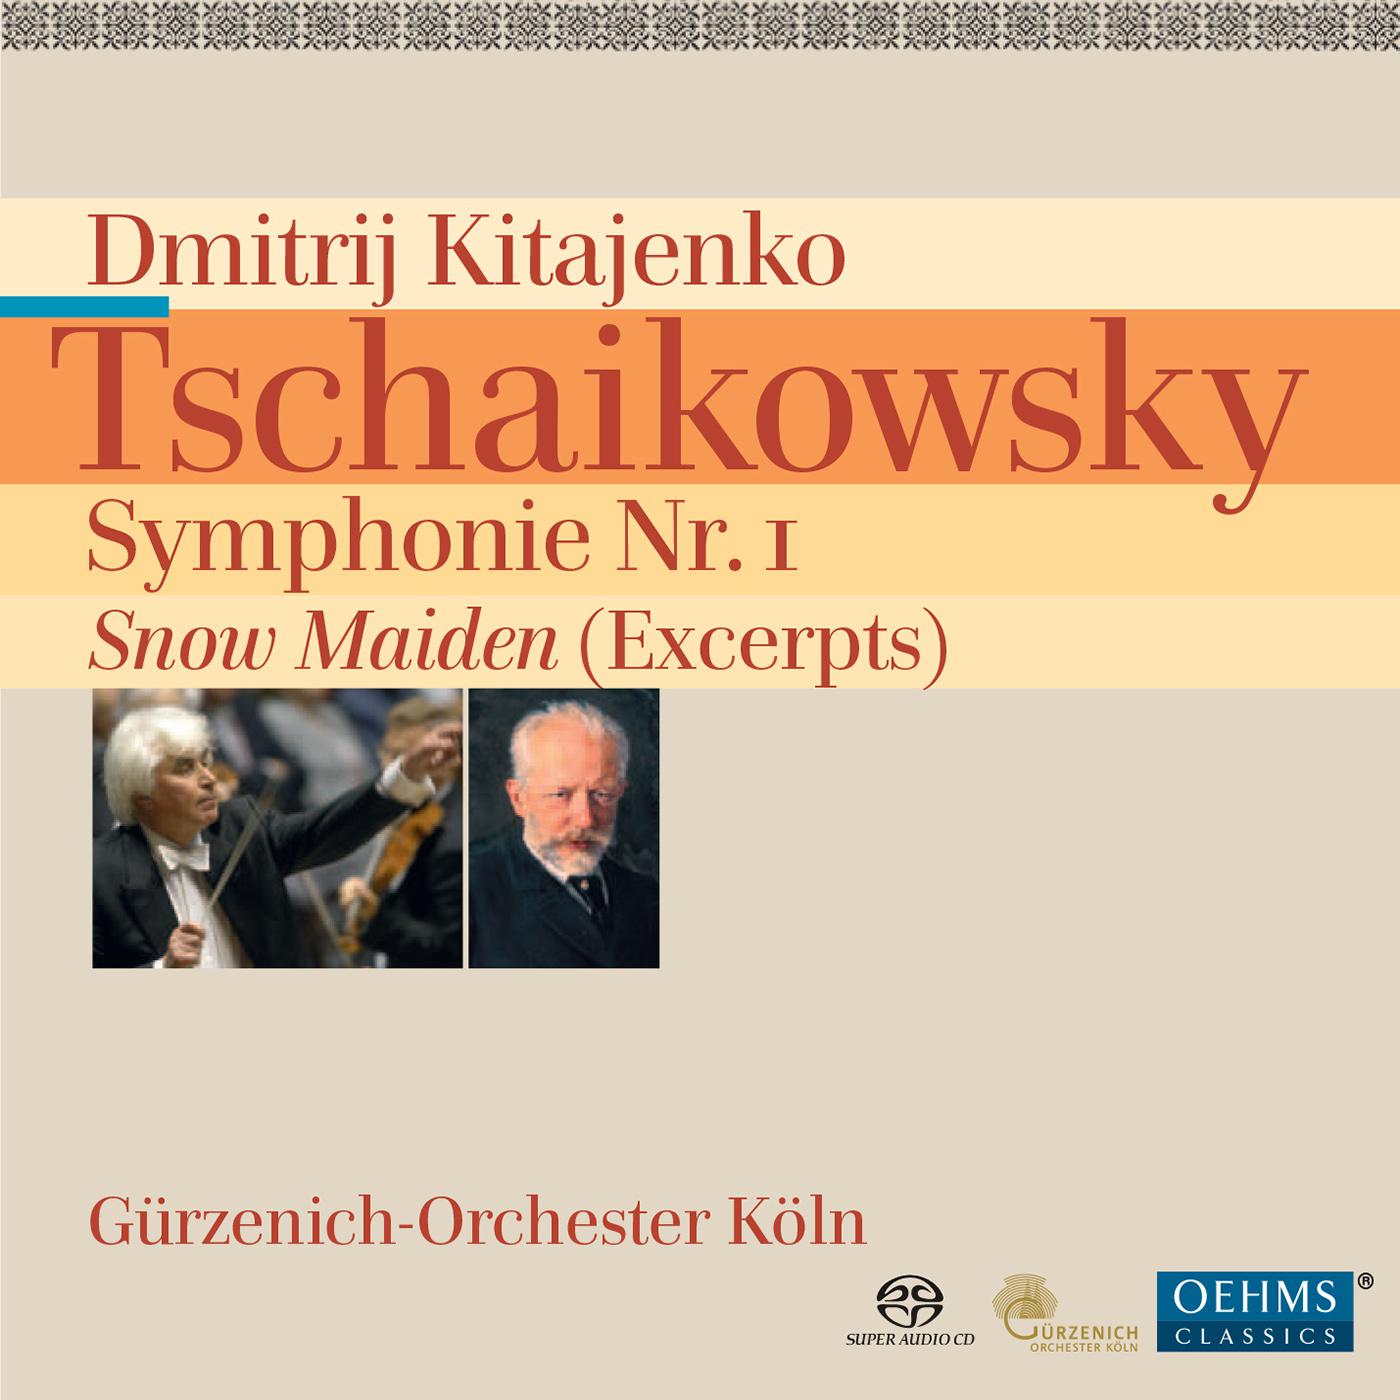 TCHAIKOVSKY, P.I.: Symphony No. 1, "Winter Daydreams" / The Snow Maiden (excerpts) (Cologne Gurzenich Orchestra, Kitayenko)